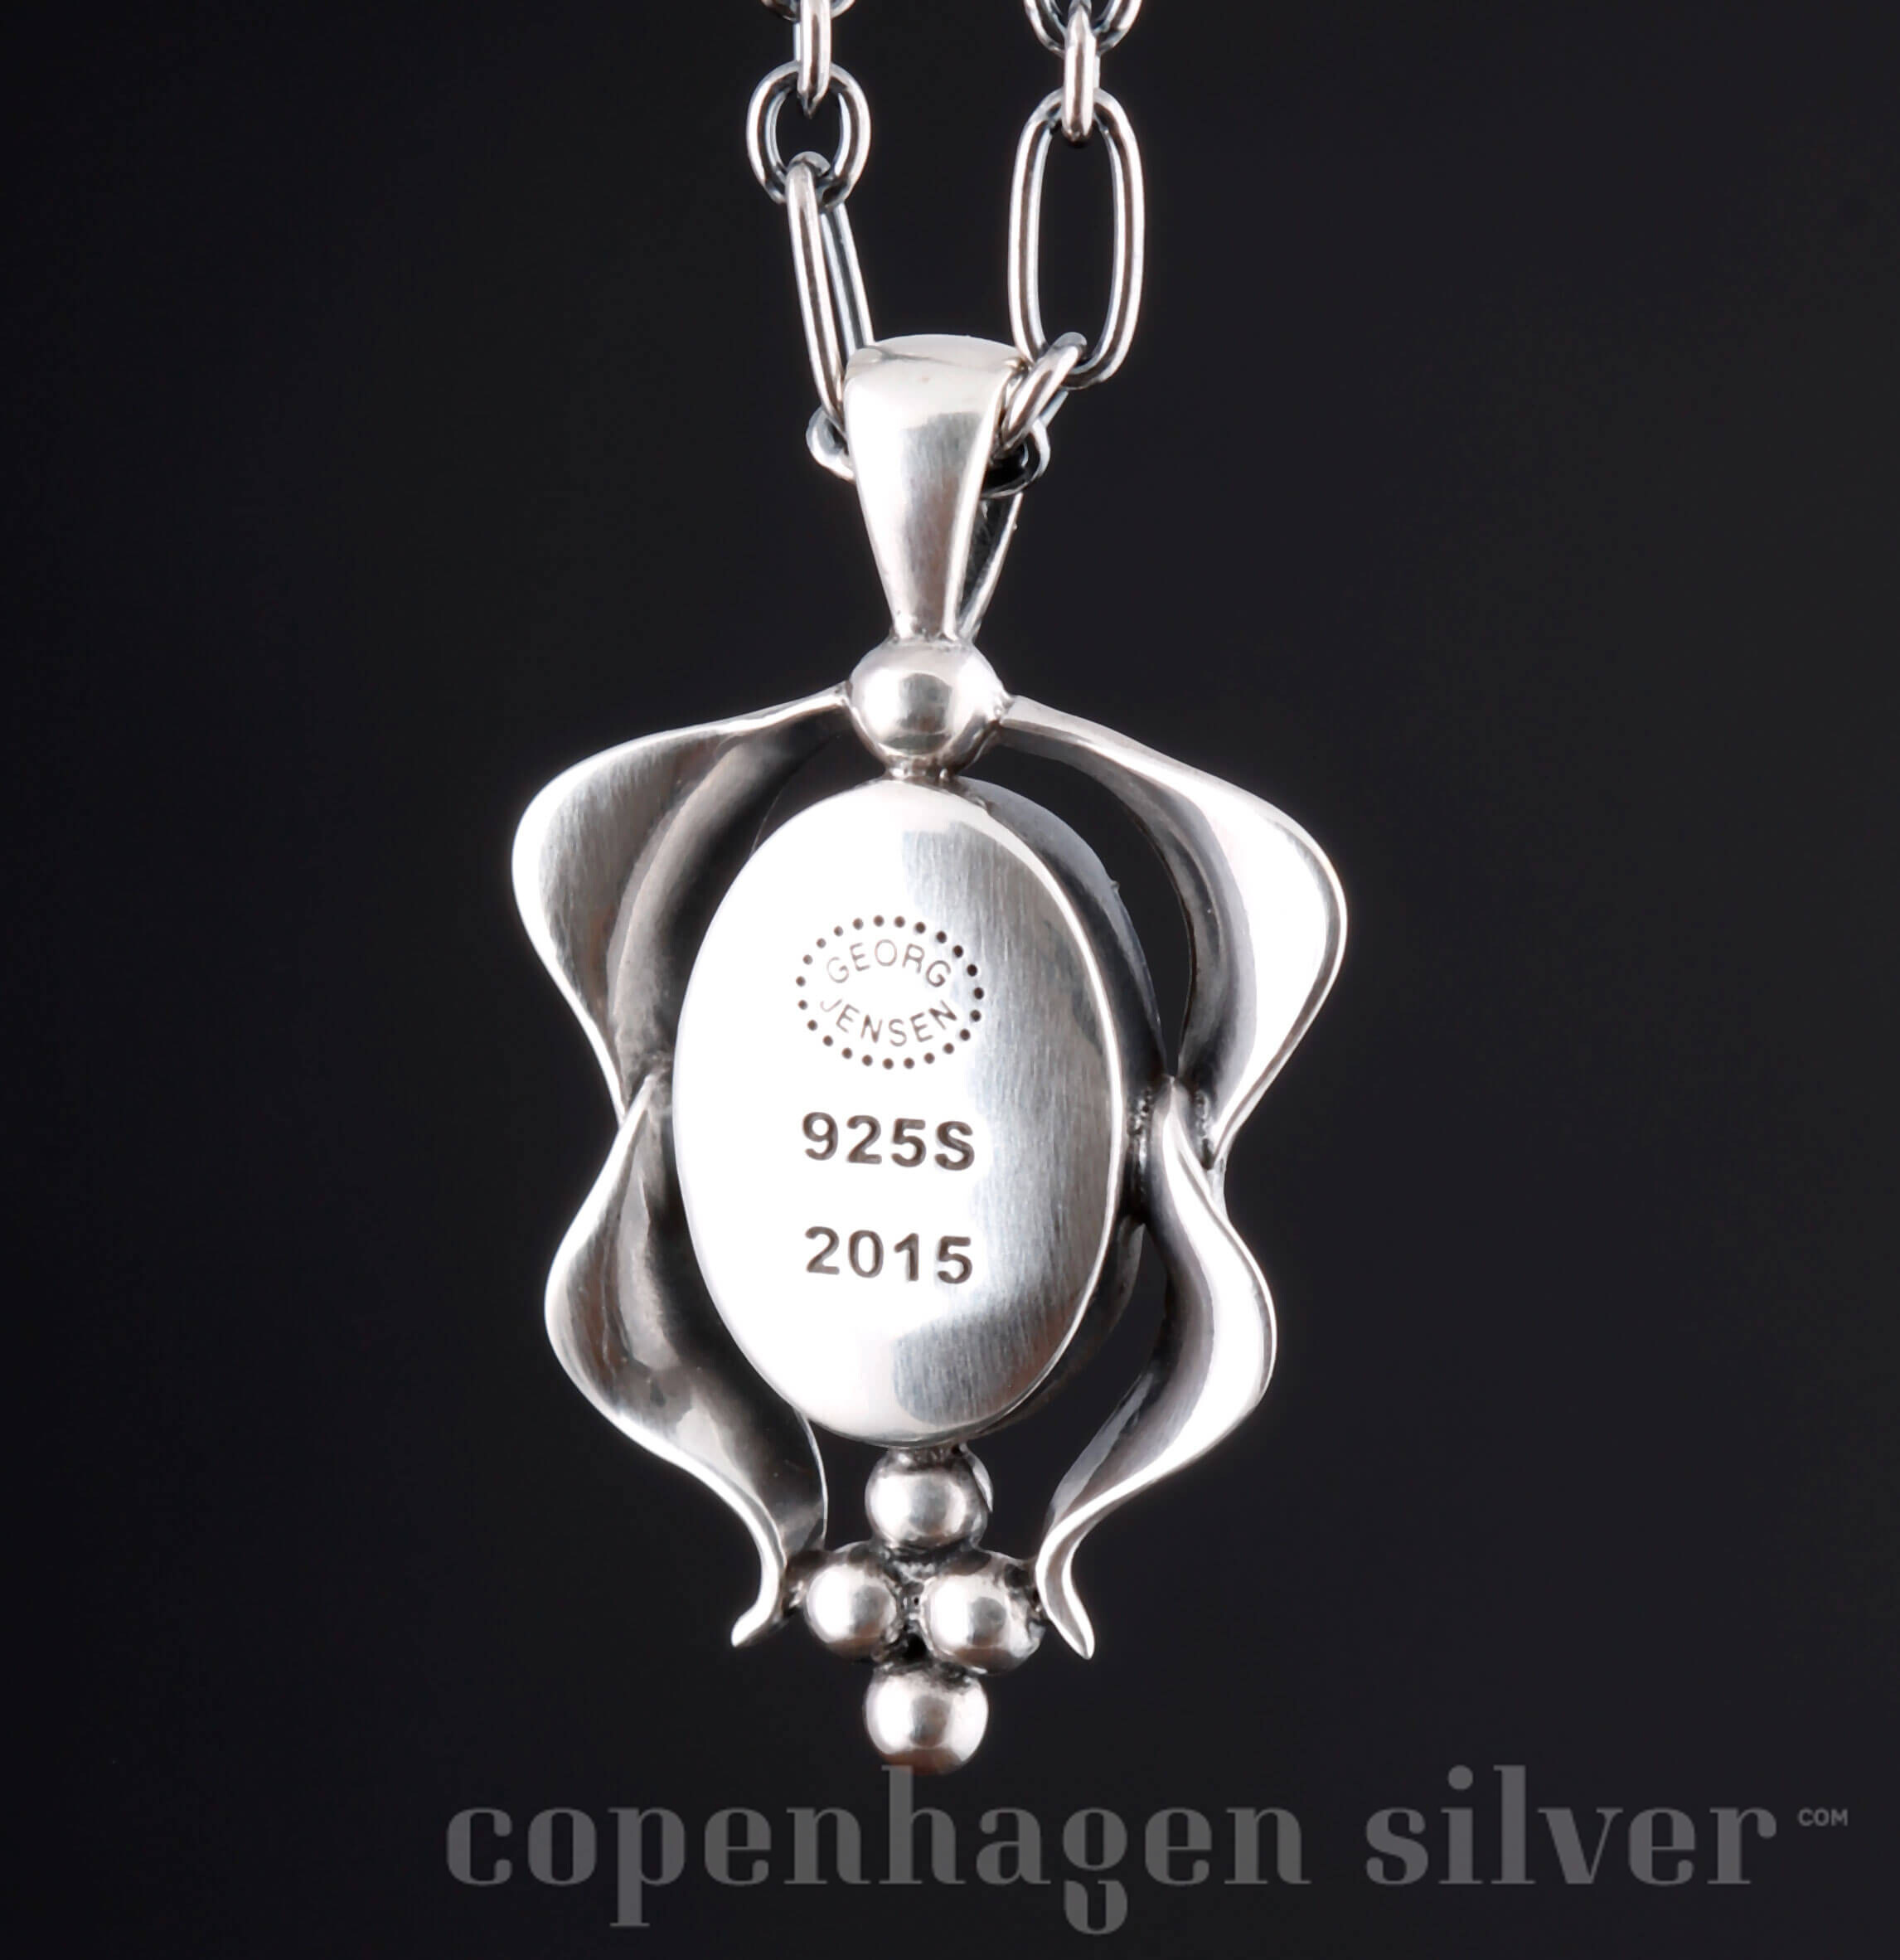 NEW. GEORG JENSEN Sterling Silver Pendant Of The Year 2015 with Silverball 